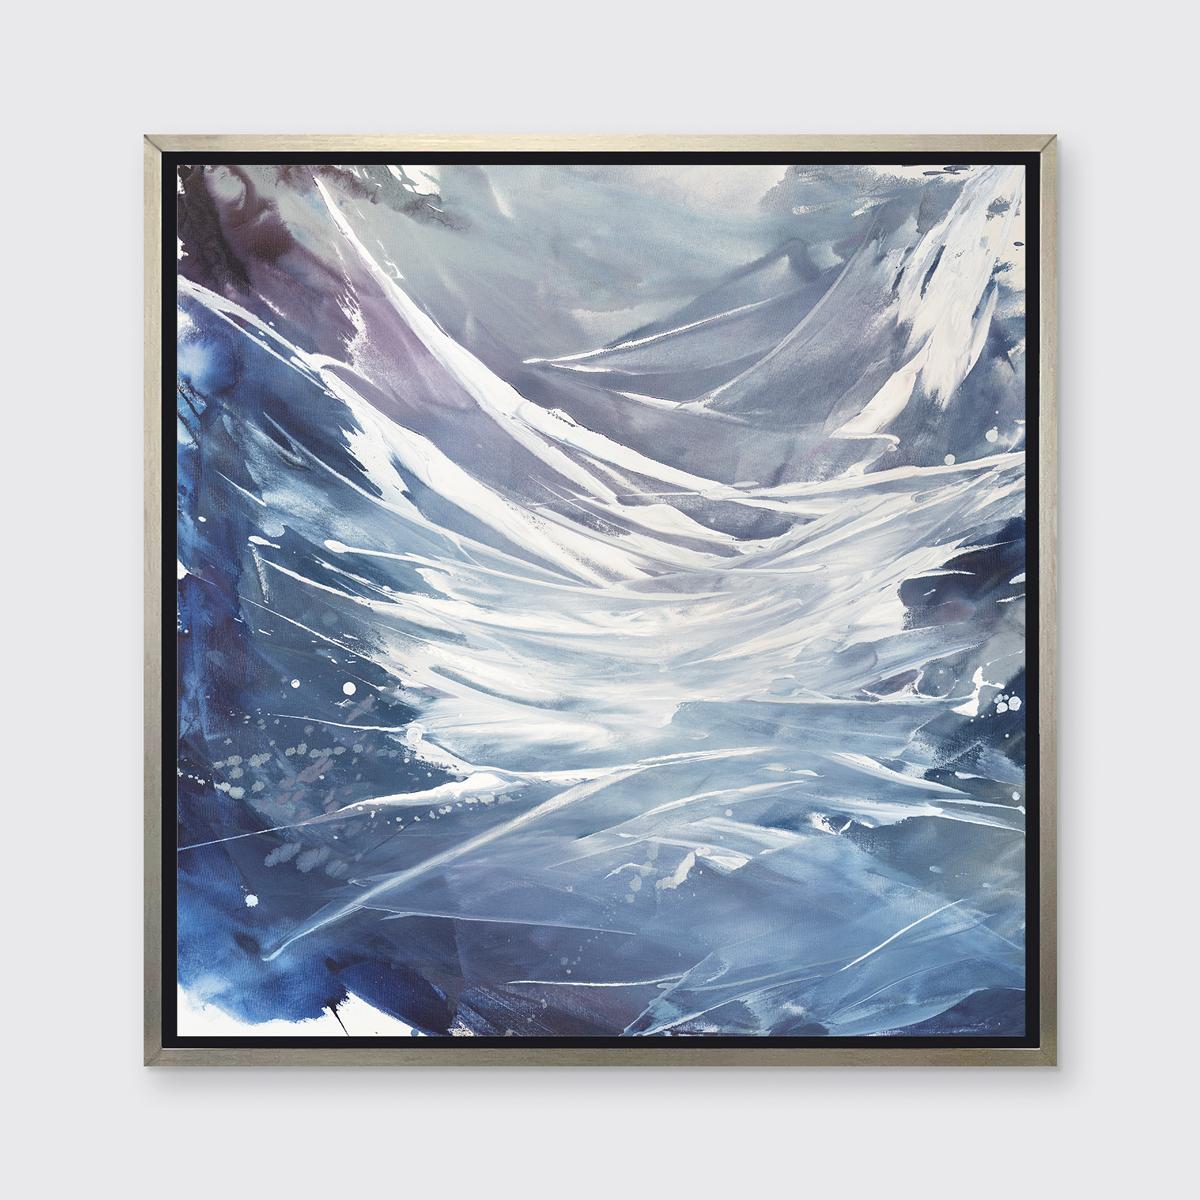 Teodora Guererra Abstract Print - "Fragments, " Framed Limited Edition Giclee Print, 36" x 36"